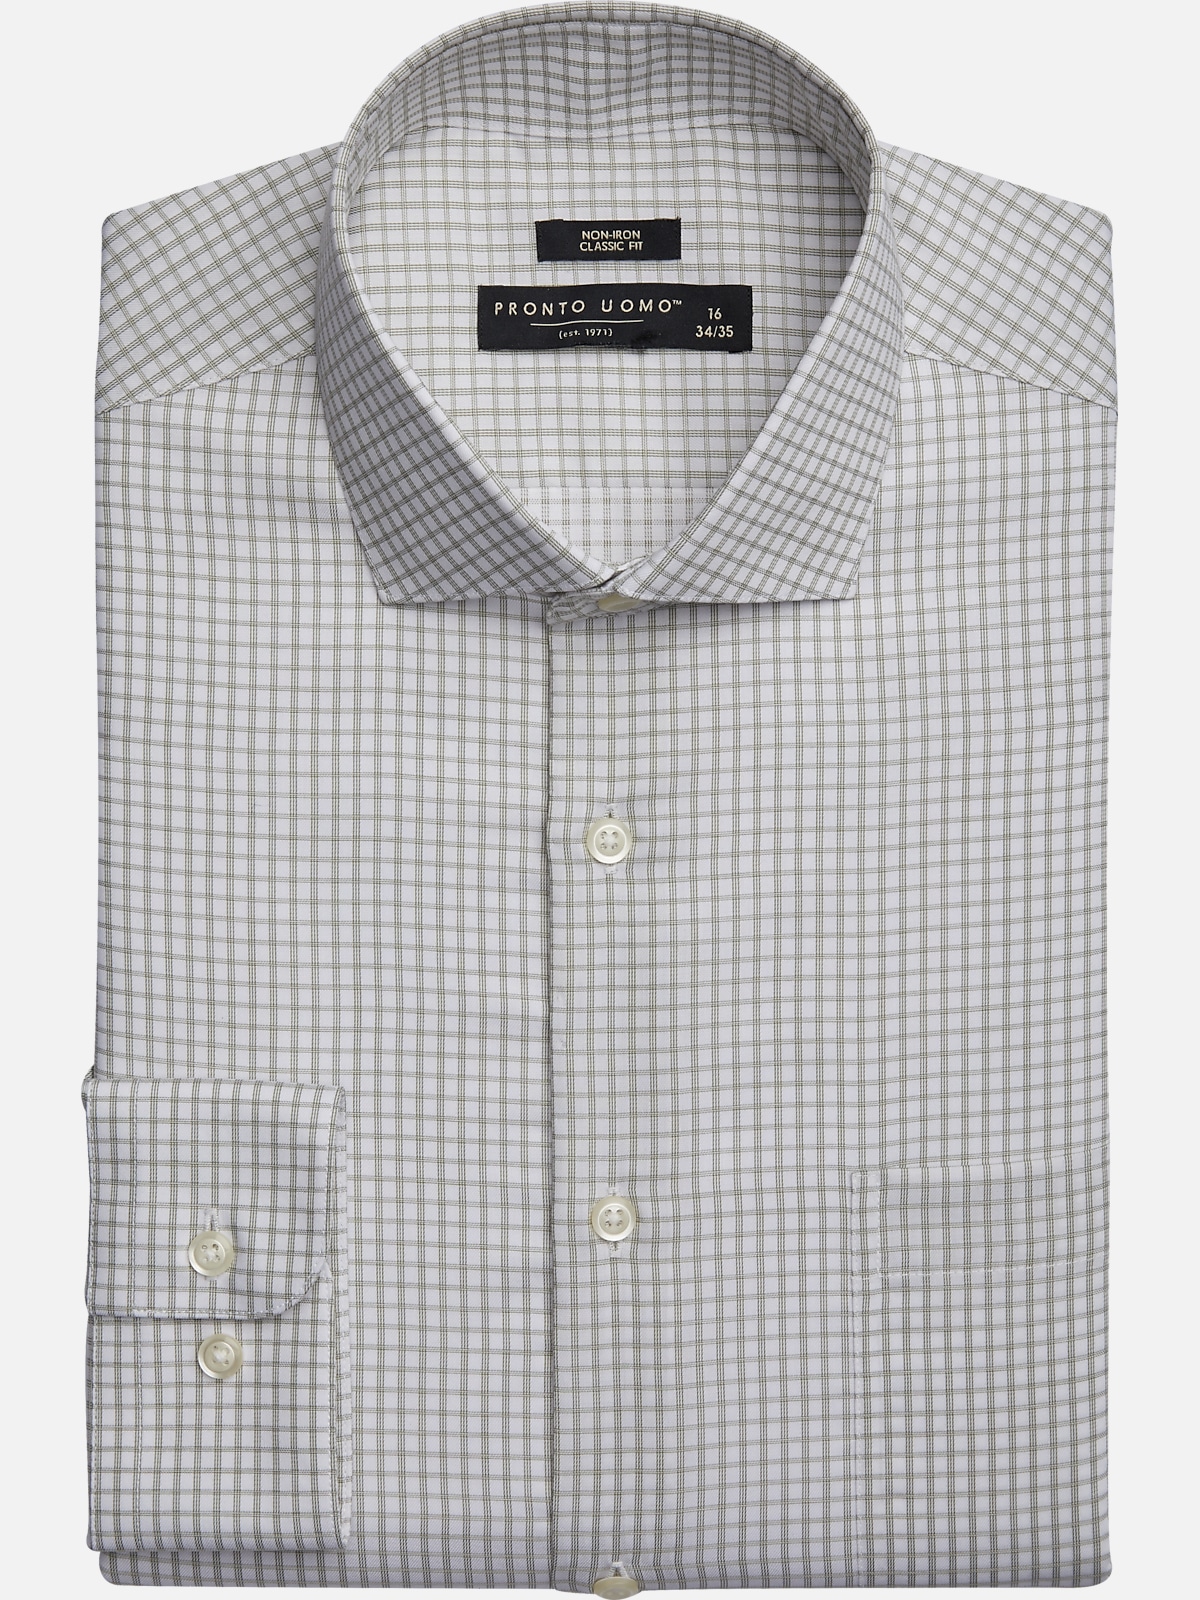 Pronto Uomo Classic Fit Spread Collar Dress Shirt | All Clearance $39. ...